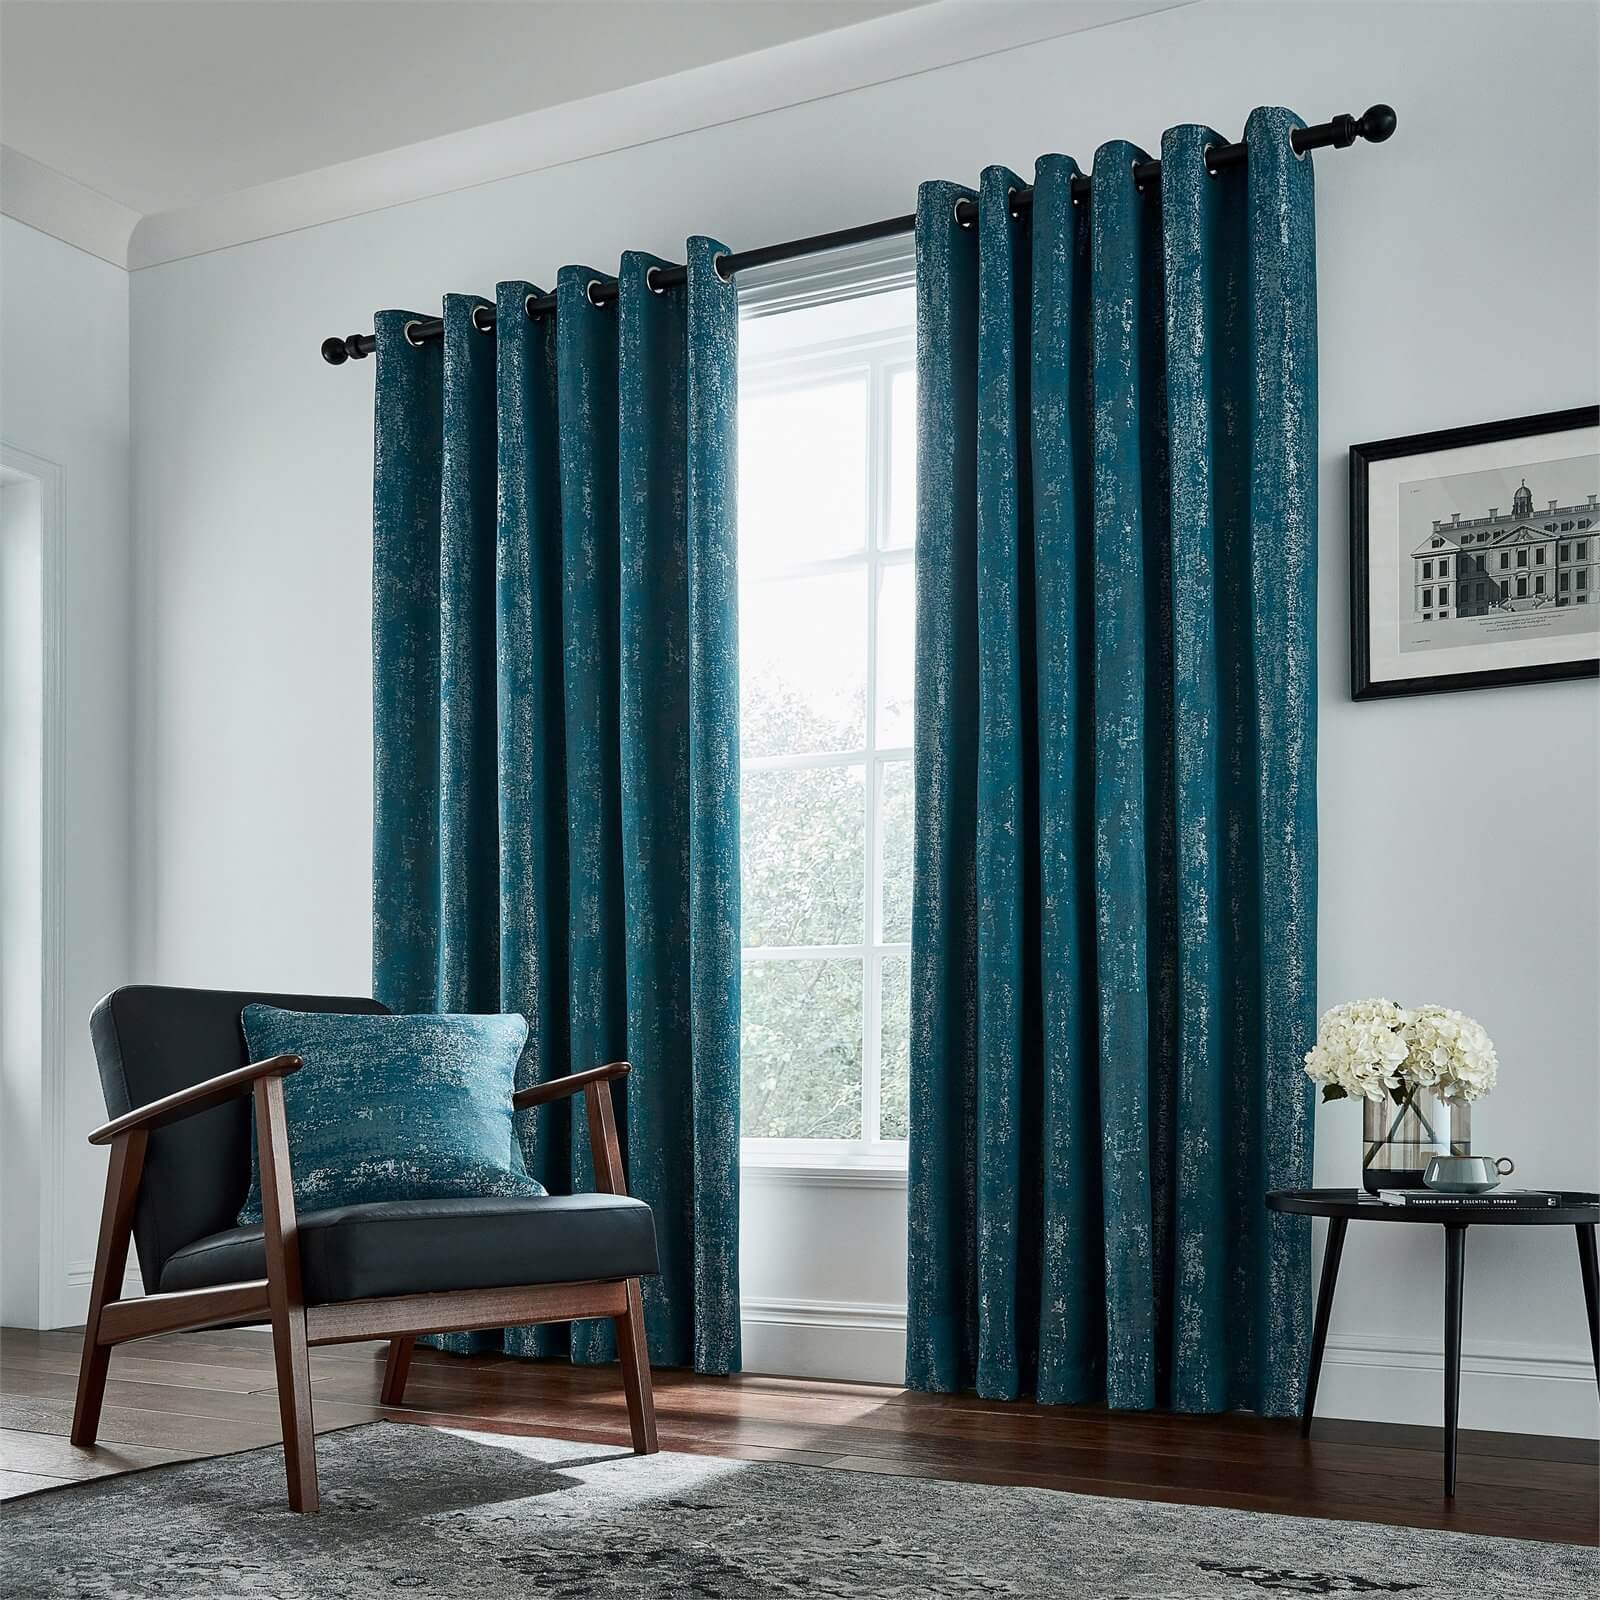 Peacock Blue Hotel Collection Roma Lined Curtains 66 x 90 - Emerald